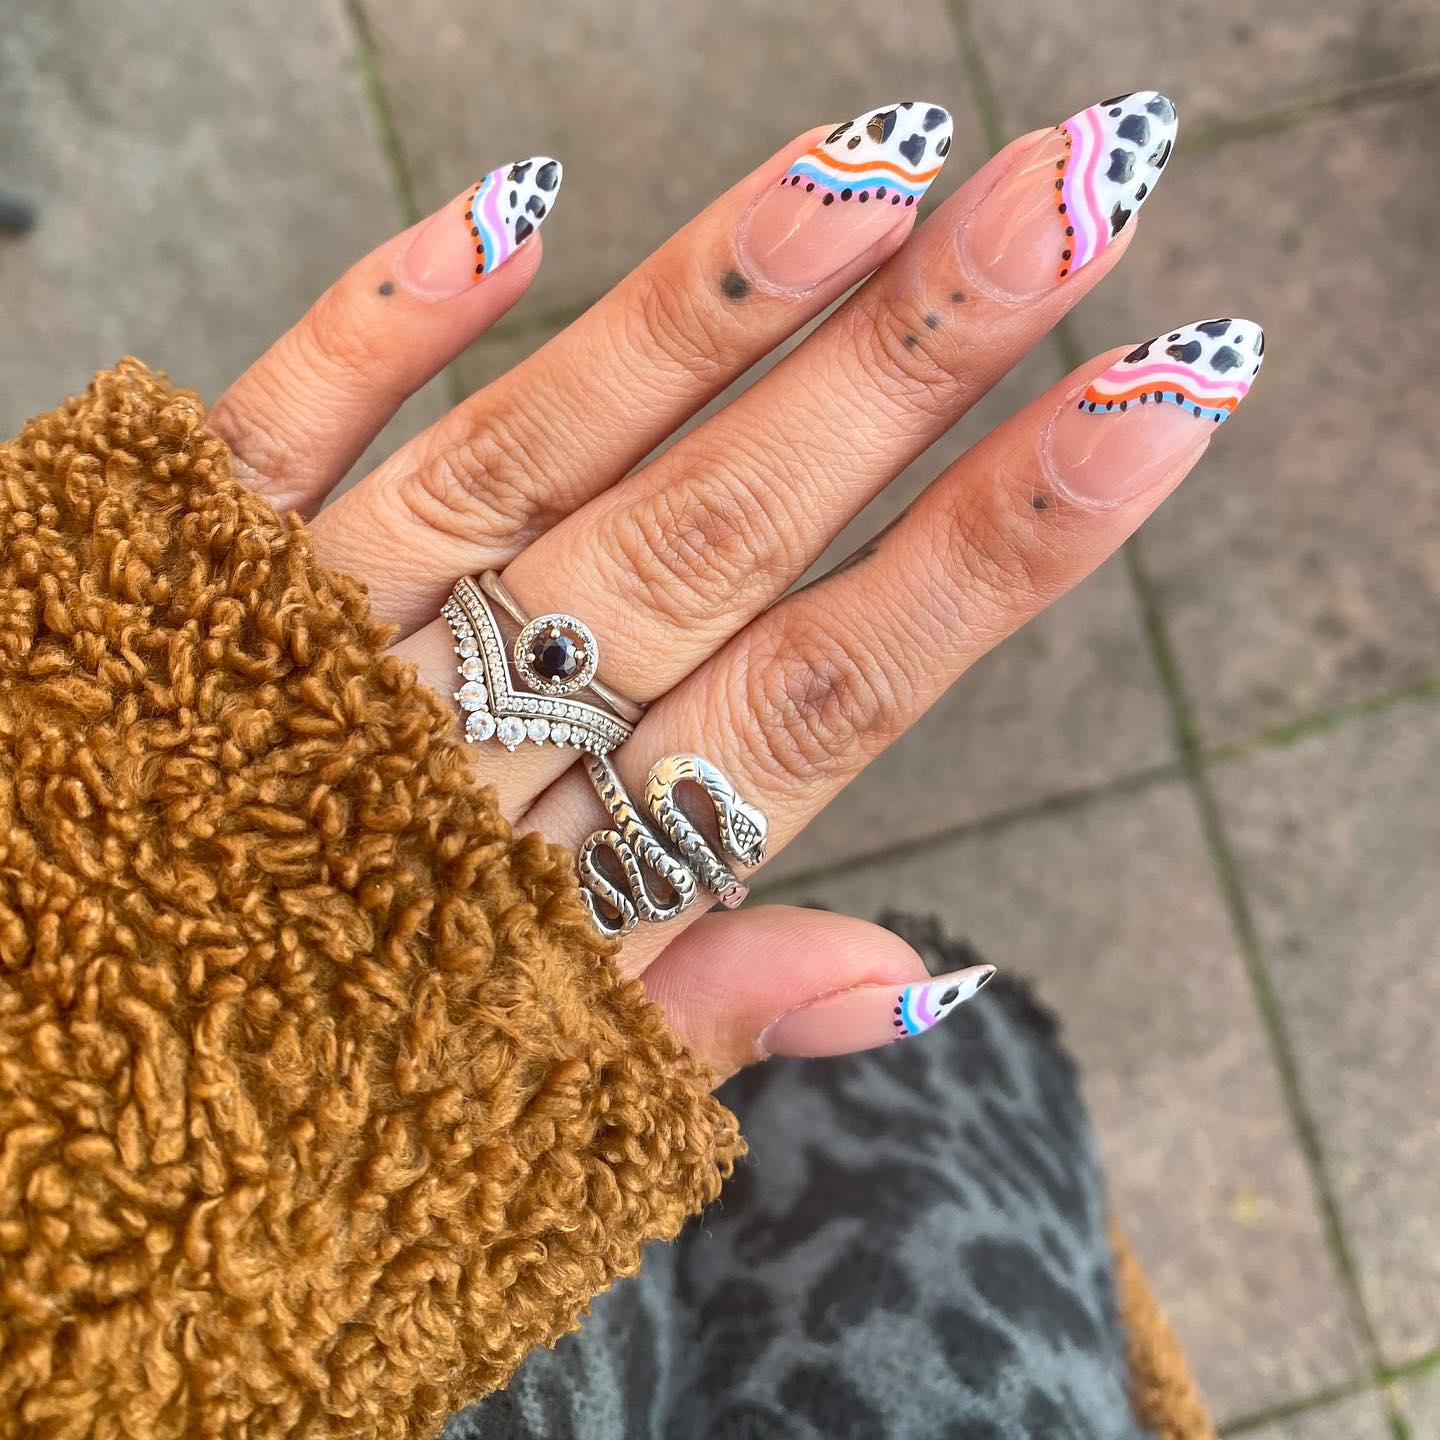 A little bit of colorful swirls and cow print French tips are all you need to feel like a nail art queen! You should get this mani as soon as possible.